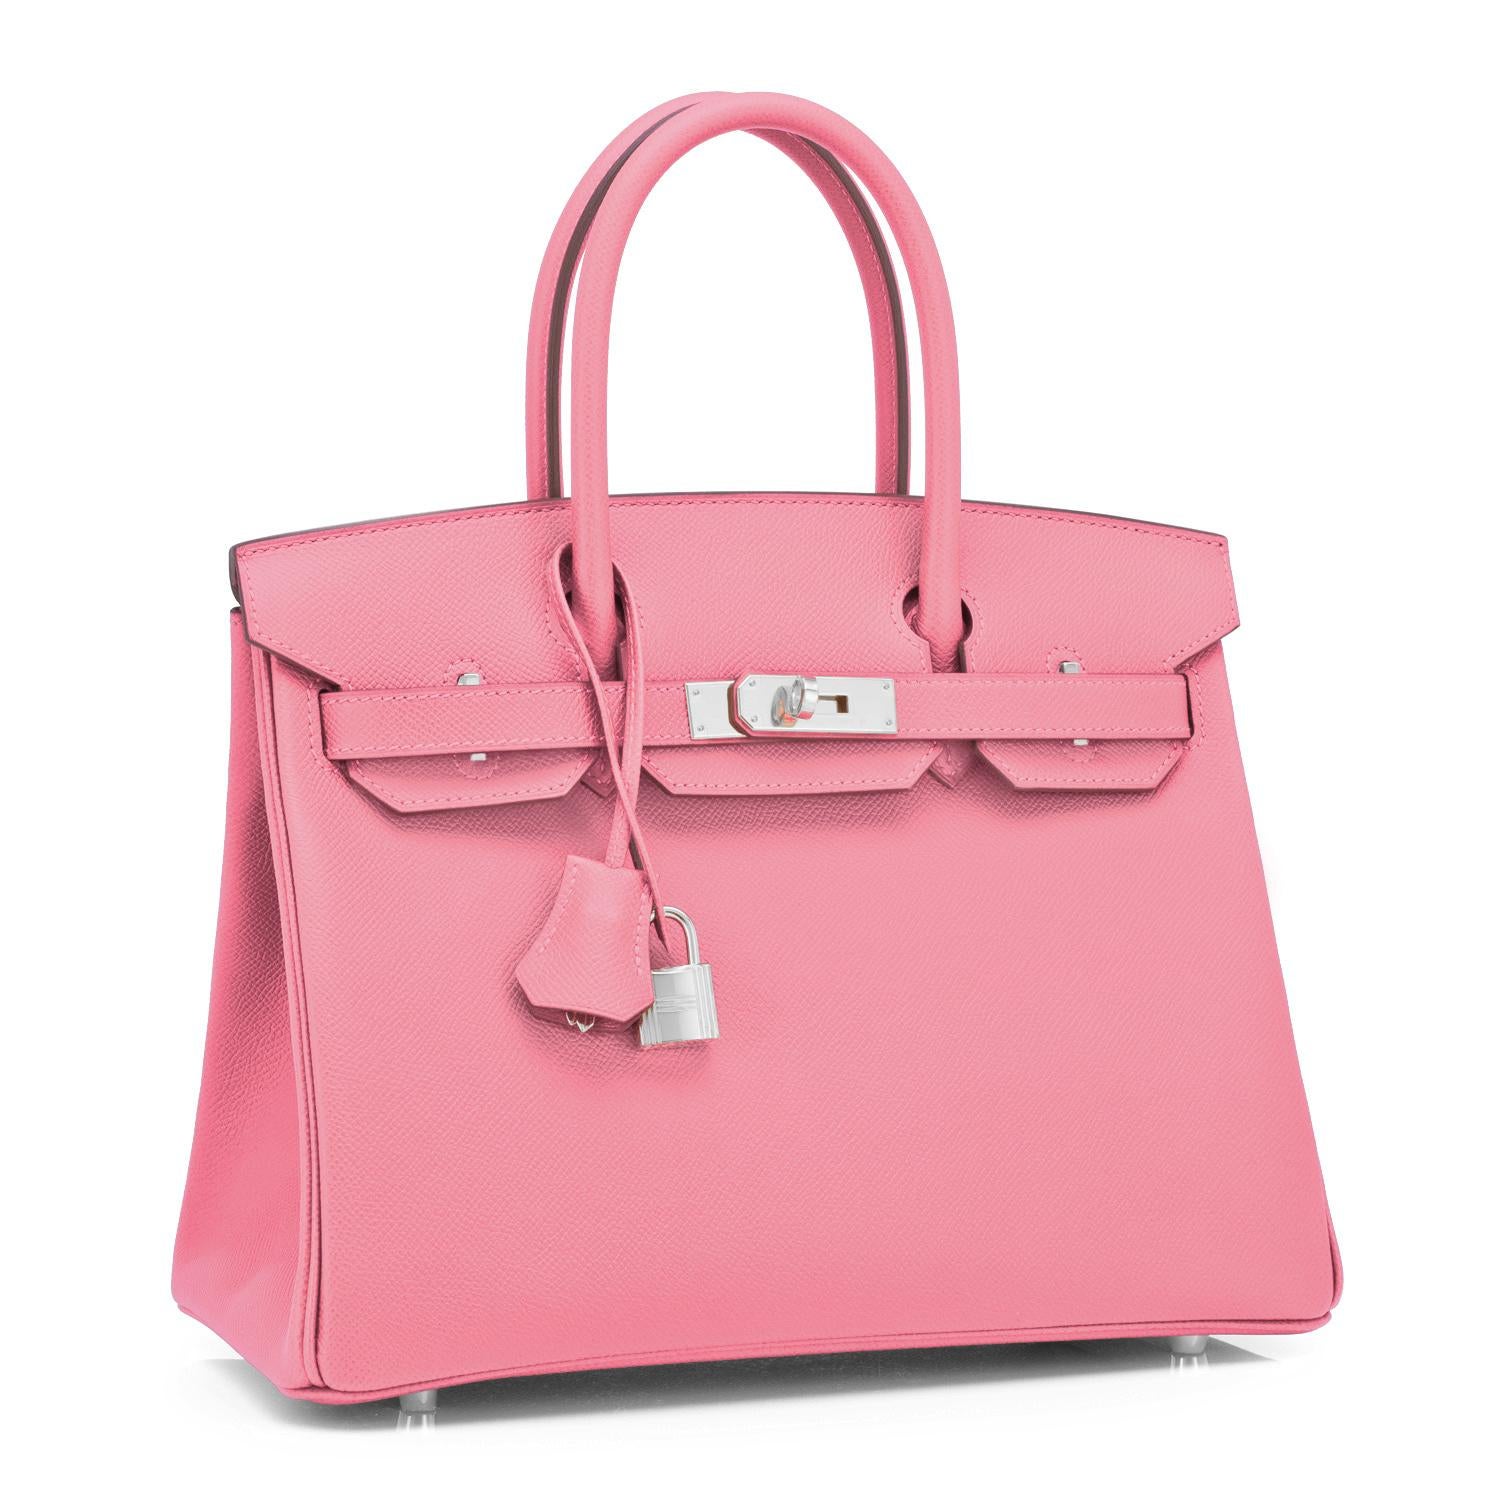 Hermes Birkin 30cm Rose Confetti Pink Epsom Palladium Y Stamp, 2020
Brand New in Box. Store Fresh. Pristine Condition (with plastic on hardware).
Just purchased from Hermes store; bag bears new interior 2020 Y stamp.
Perfect gift! Comes full set